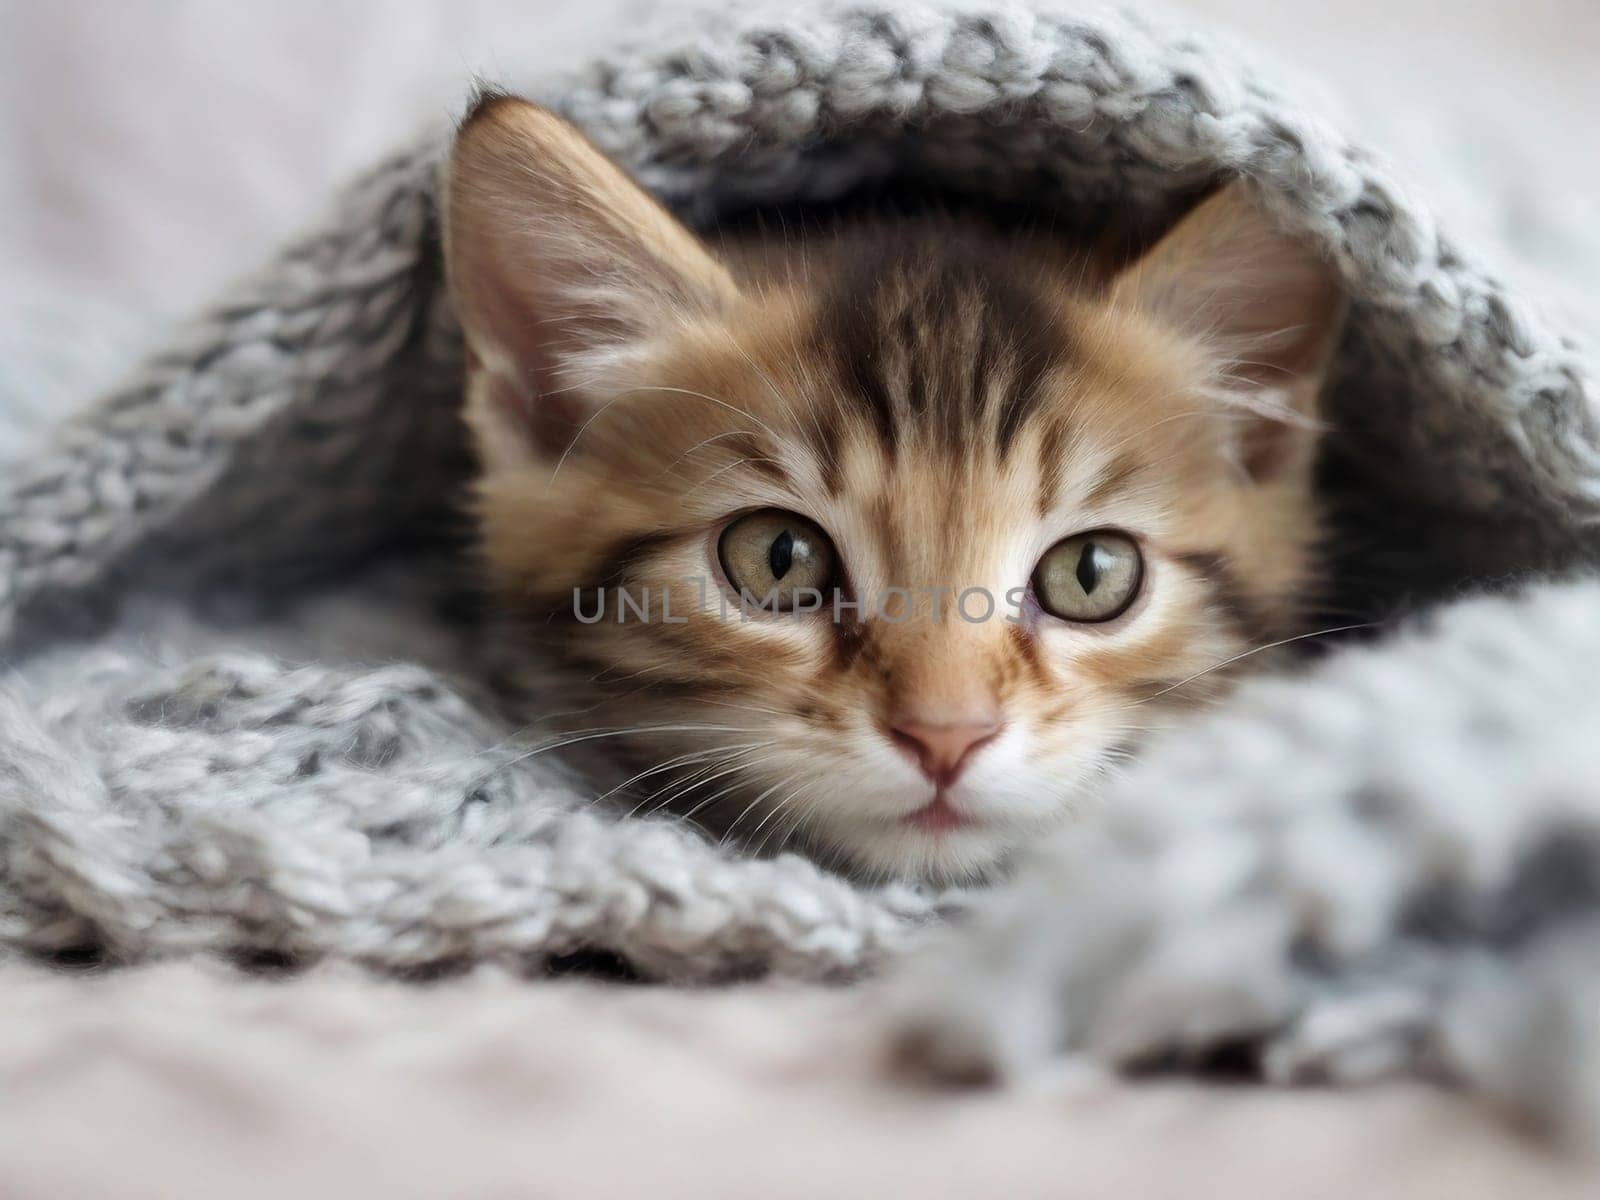 Cute gray kitten in a knitted blanket and scarf.